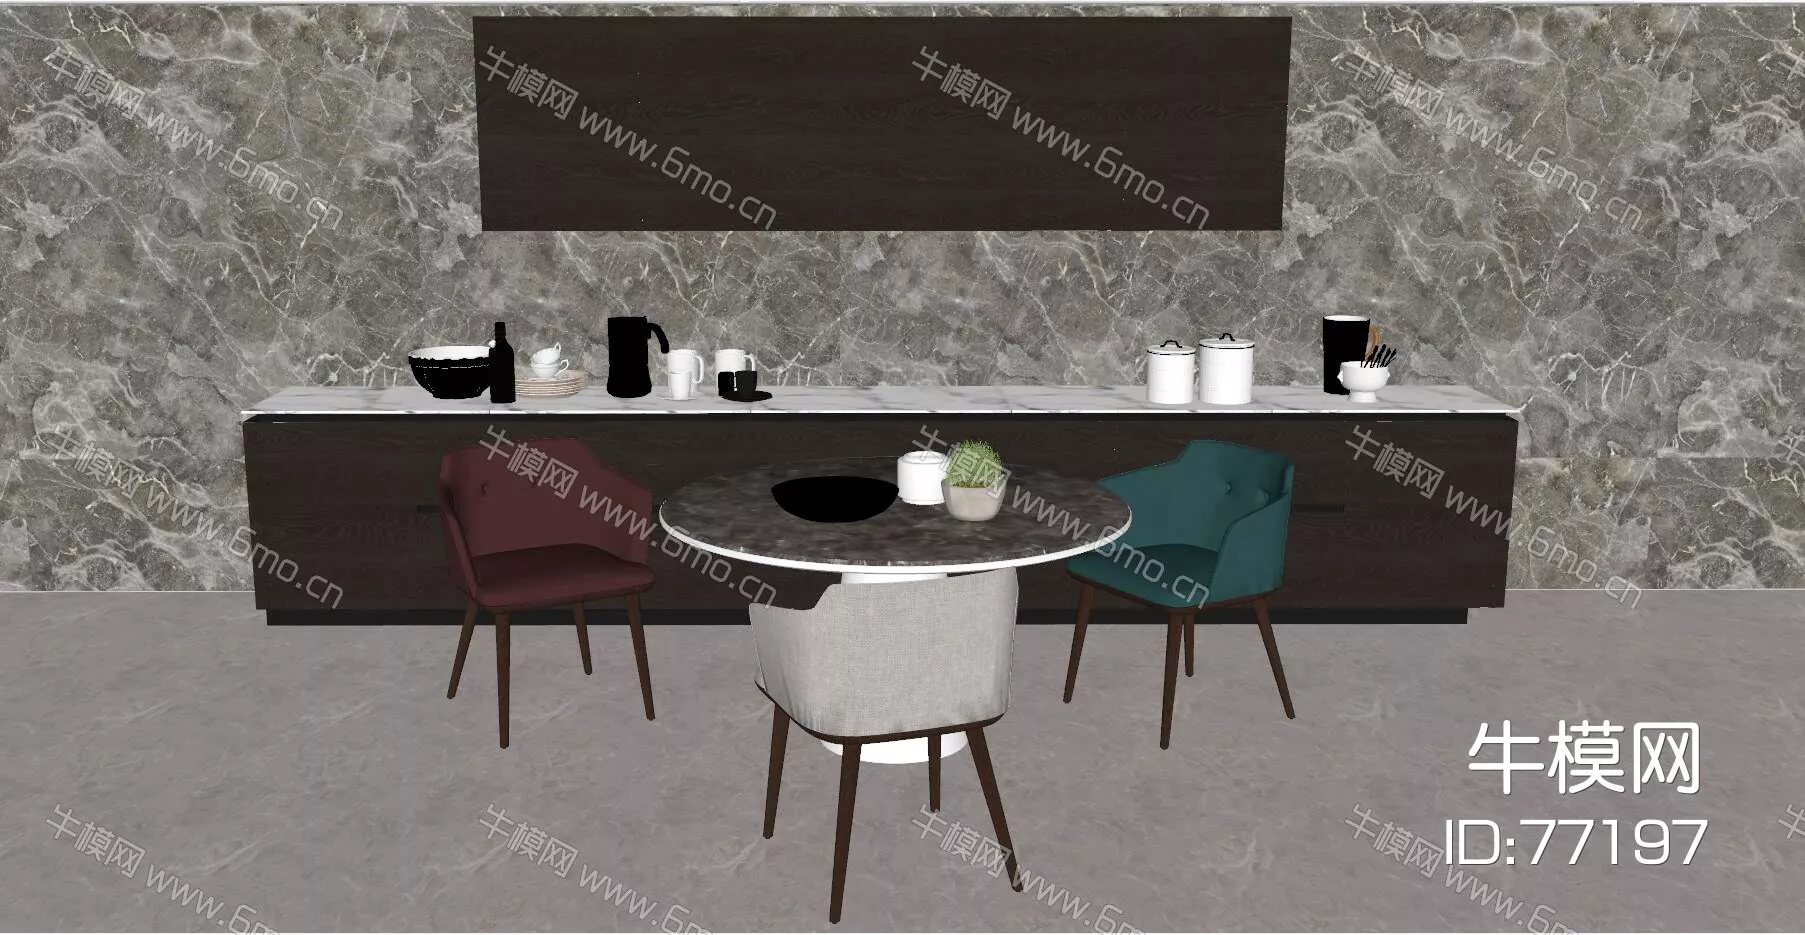 NORDIC DINING TABLE SET - SKETCHUP 3D MODEL - VRAY - 77197